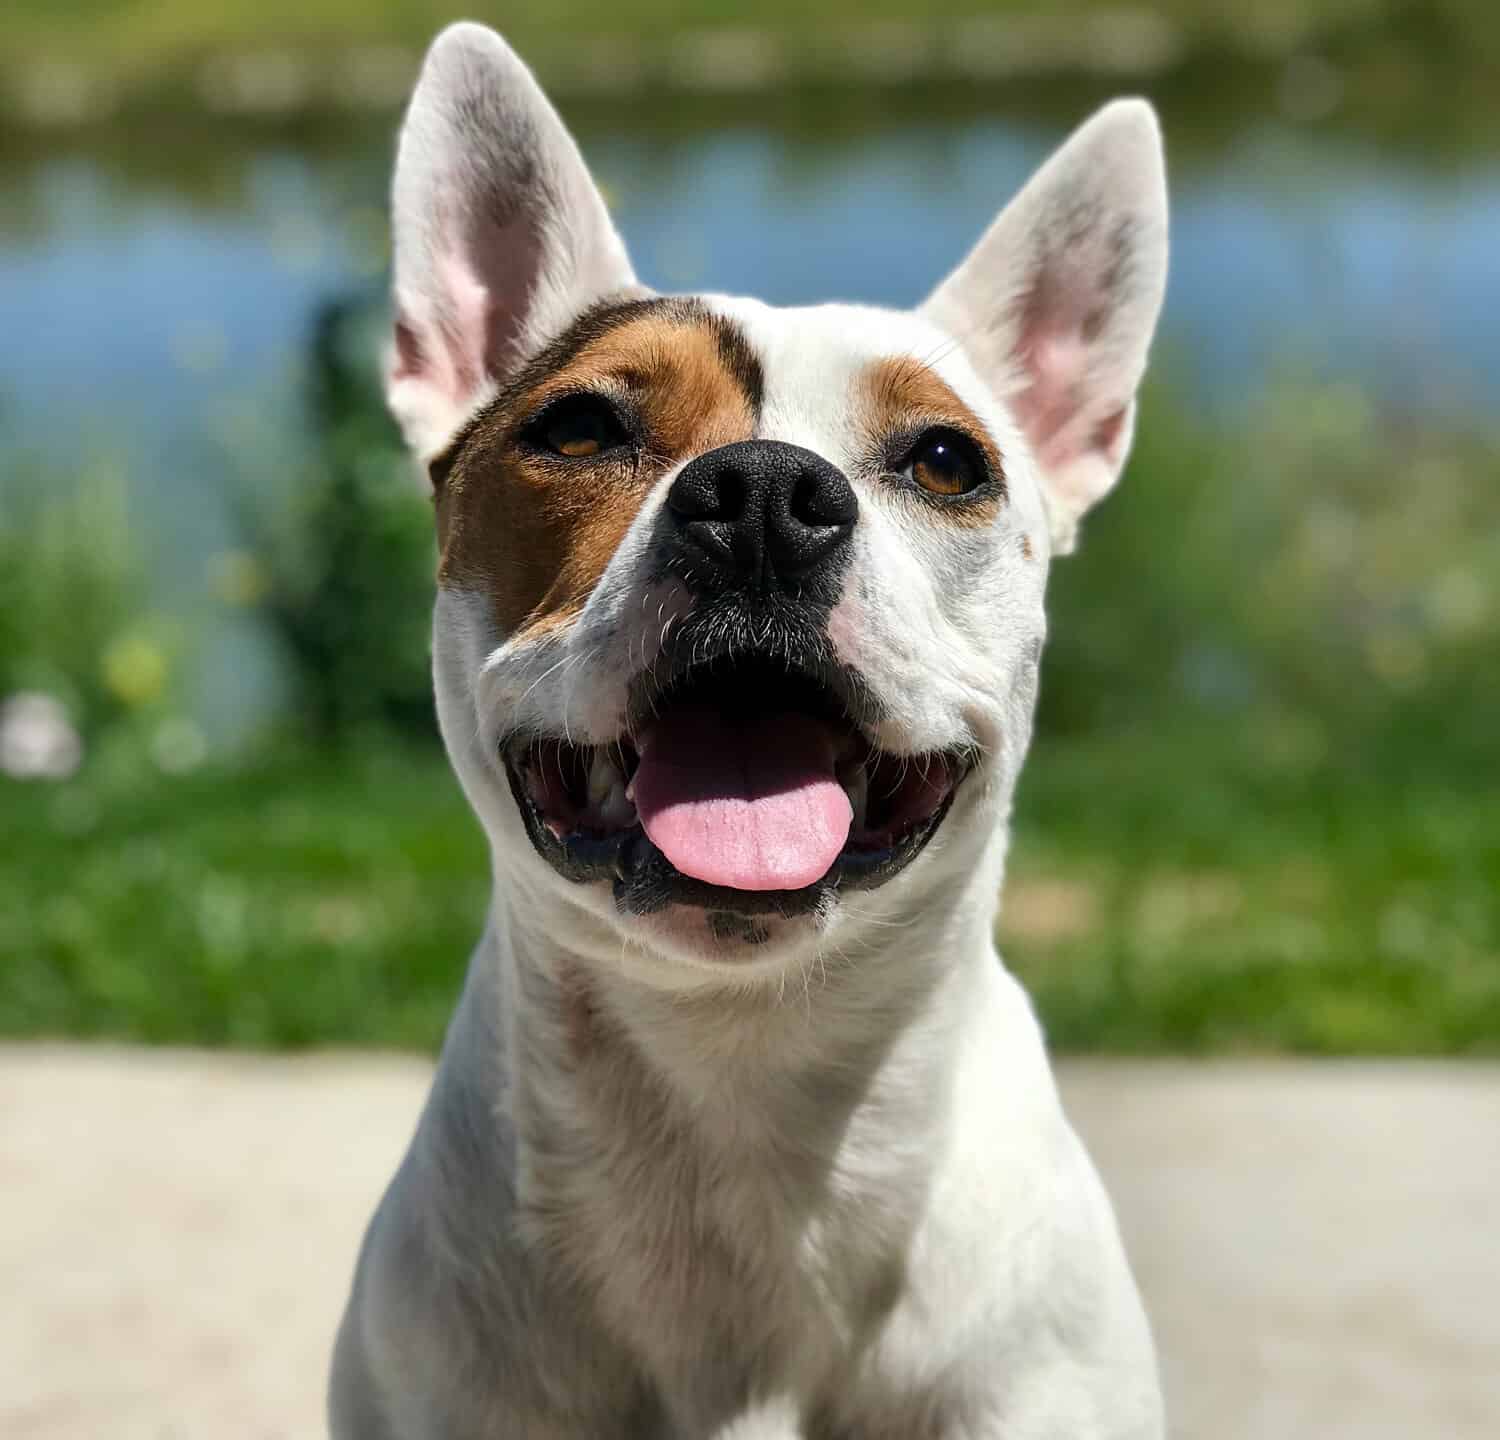 Pit bull and corgi mix might just be the cutest thing on earth.